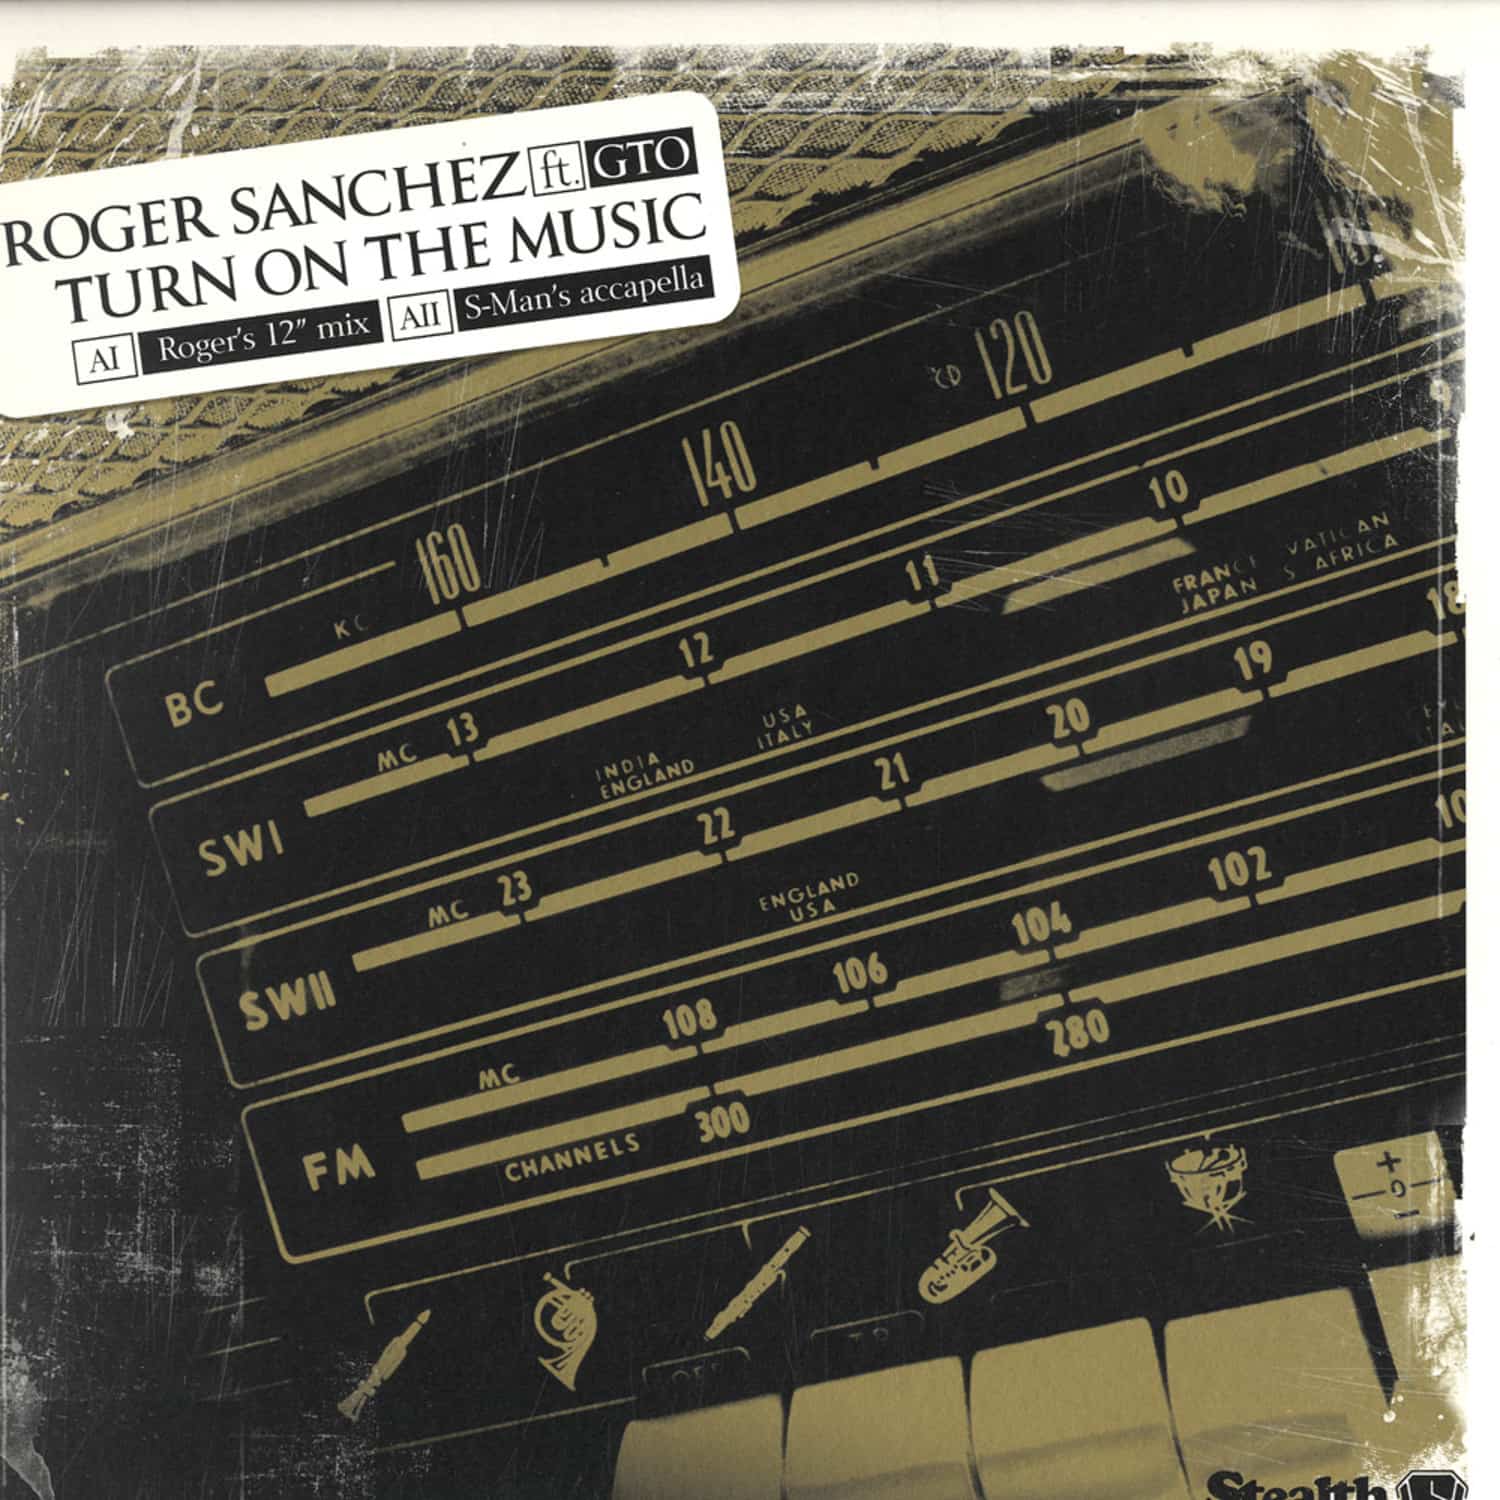 Roger Sanchez ft. GTO - TURN ON THE MUSIC